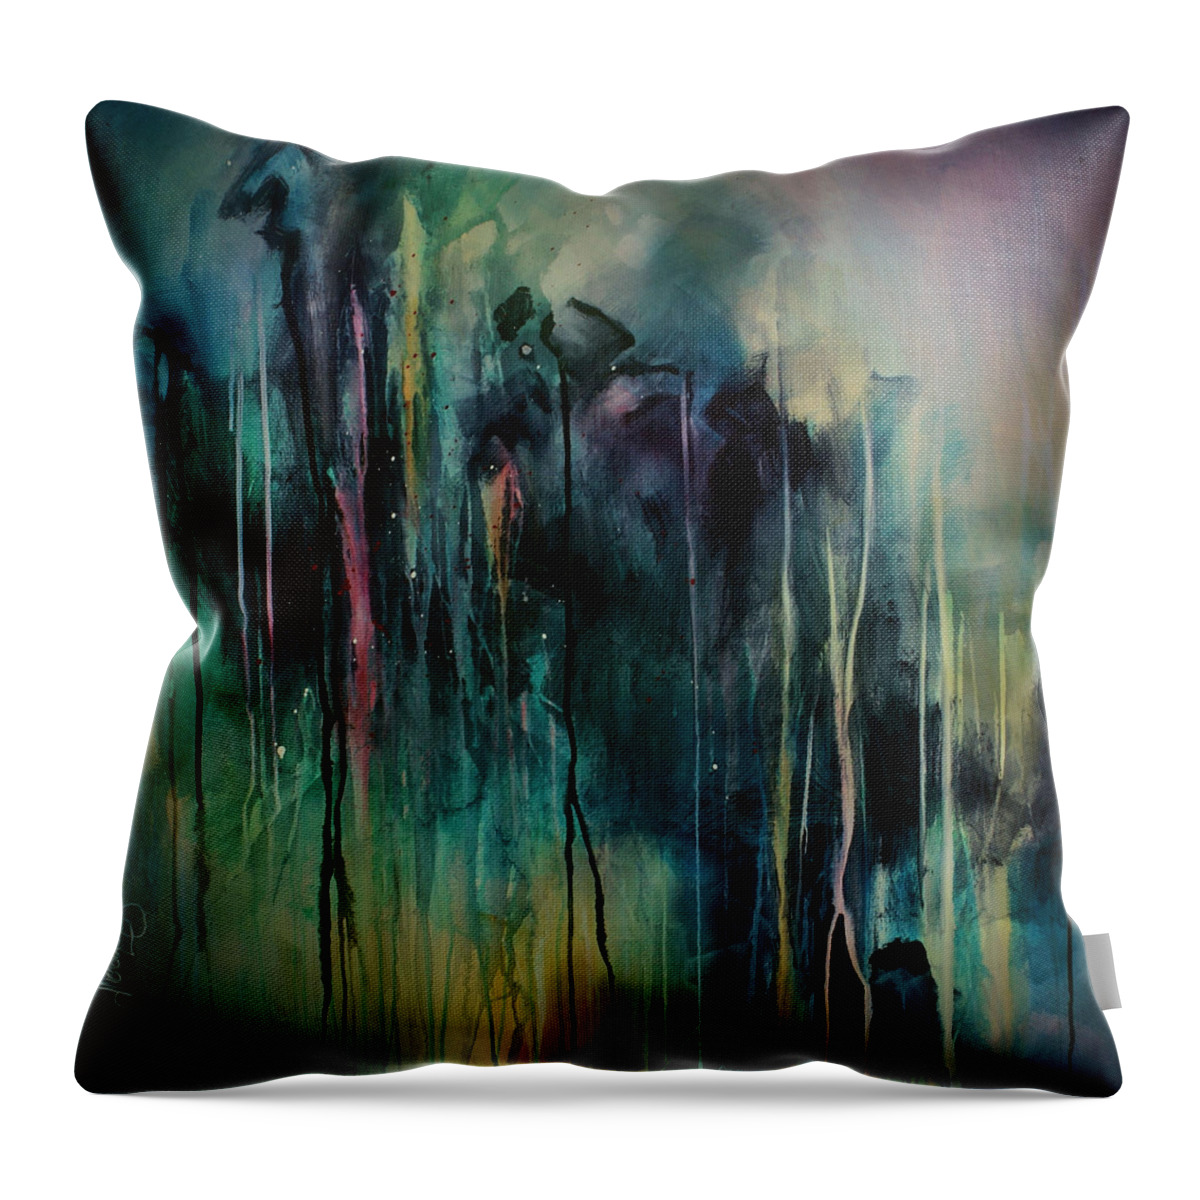 Abstract Design Throw Pillow featuring the painting Abstract by Michael Lang